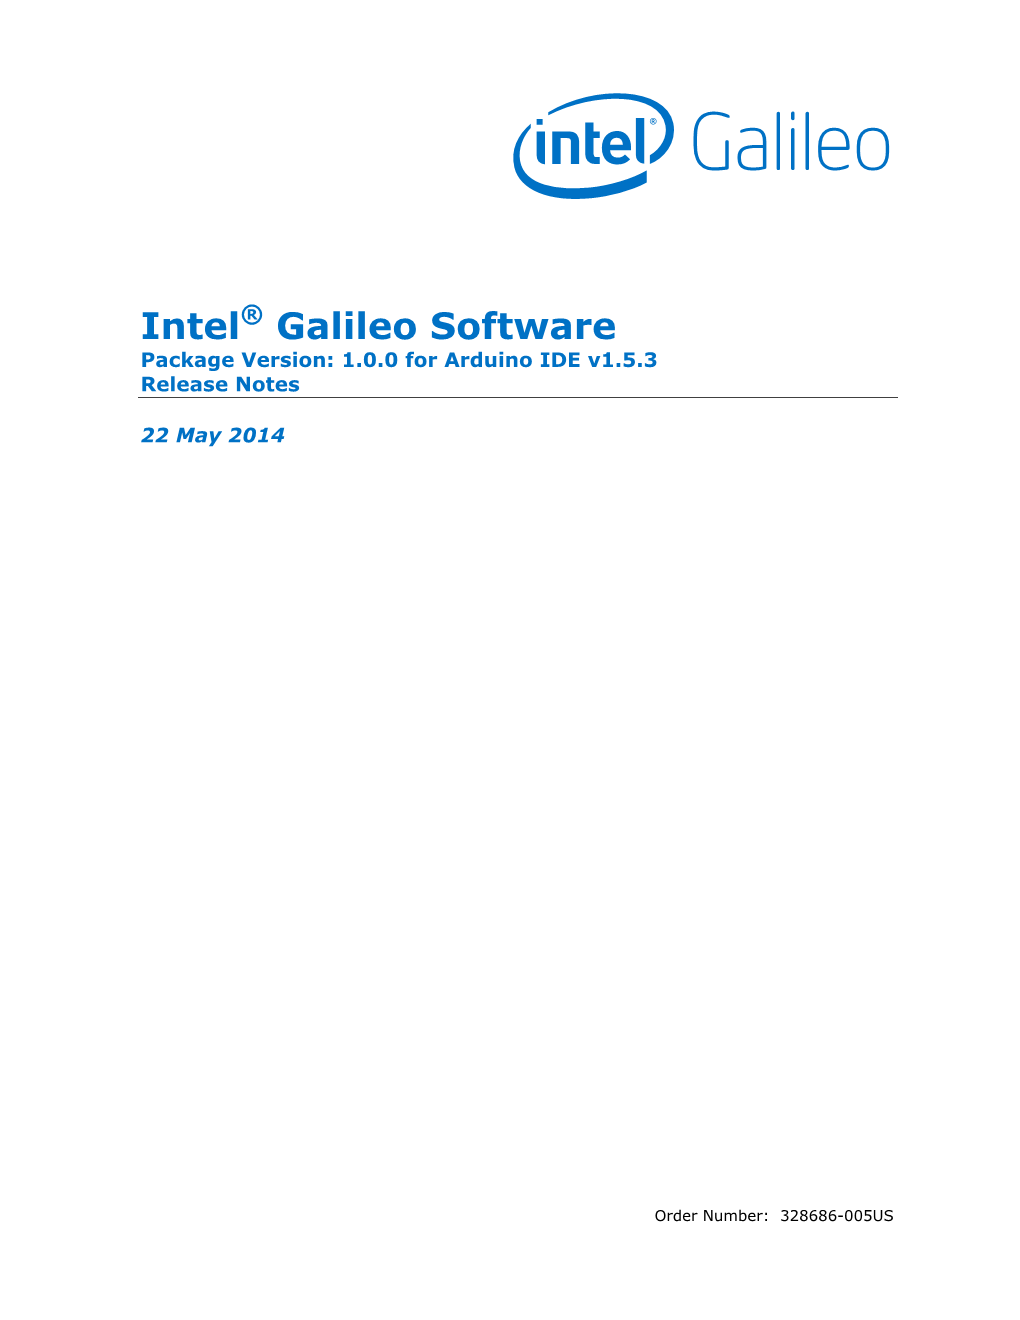 Intel® Galileo Software Package Version: 1.0.0 for Arduino IDE V1.5.3 Release Notes